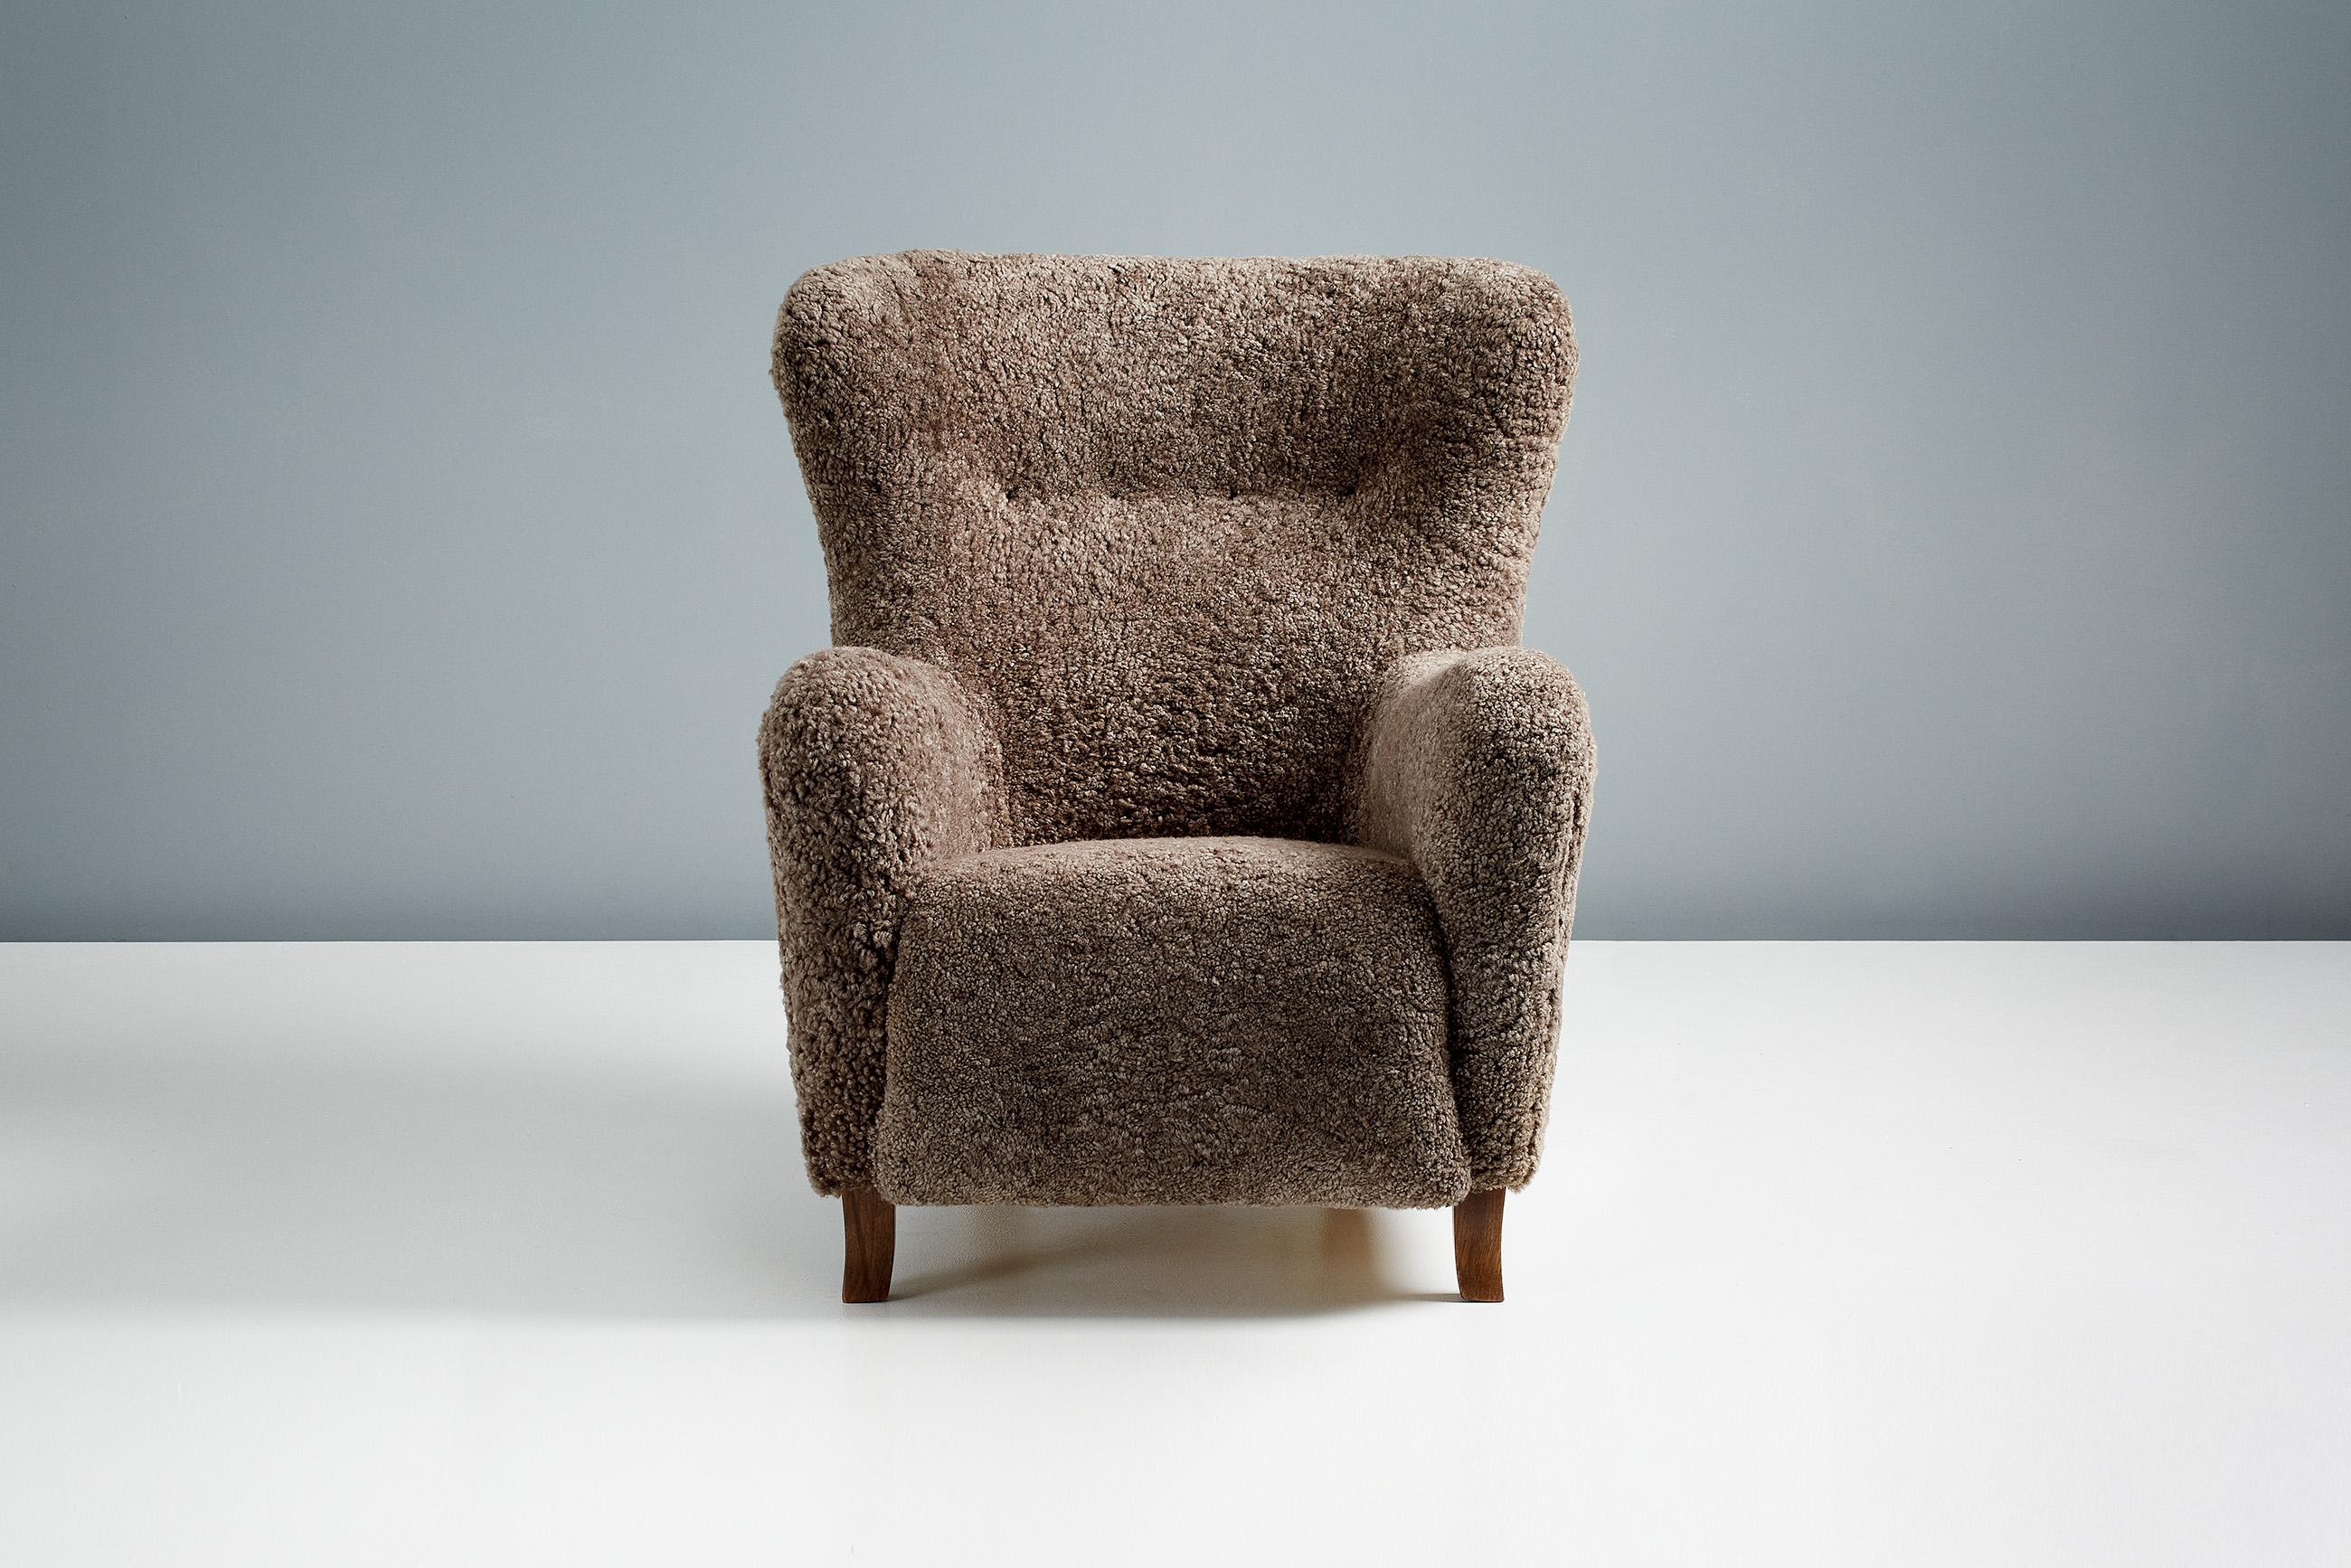 Dagmar Design - Sampo Wing Chair

The Sampo wing chair is from the Dagmar Design custom-made upholstered range. This piece has been developed and hand-made at our workshops in London using the highest quality materials. The frame is constructed